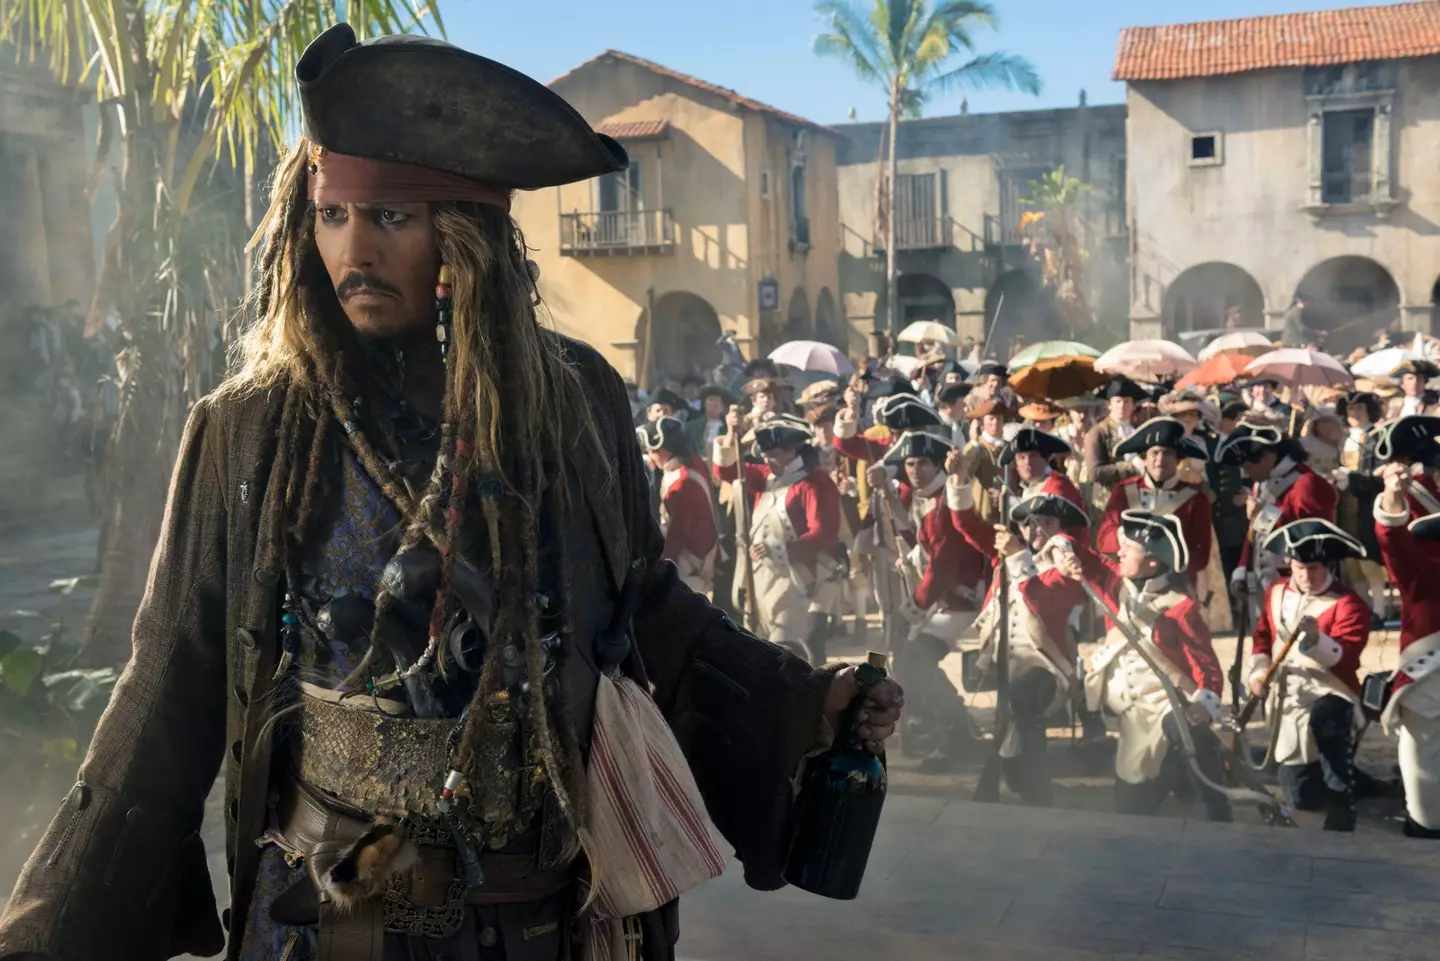 The Pirates of the Caribbean star might be able to turn the pub around.